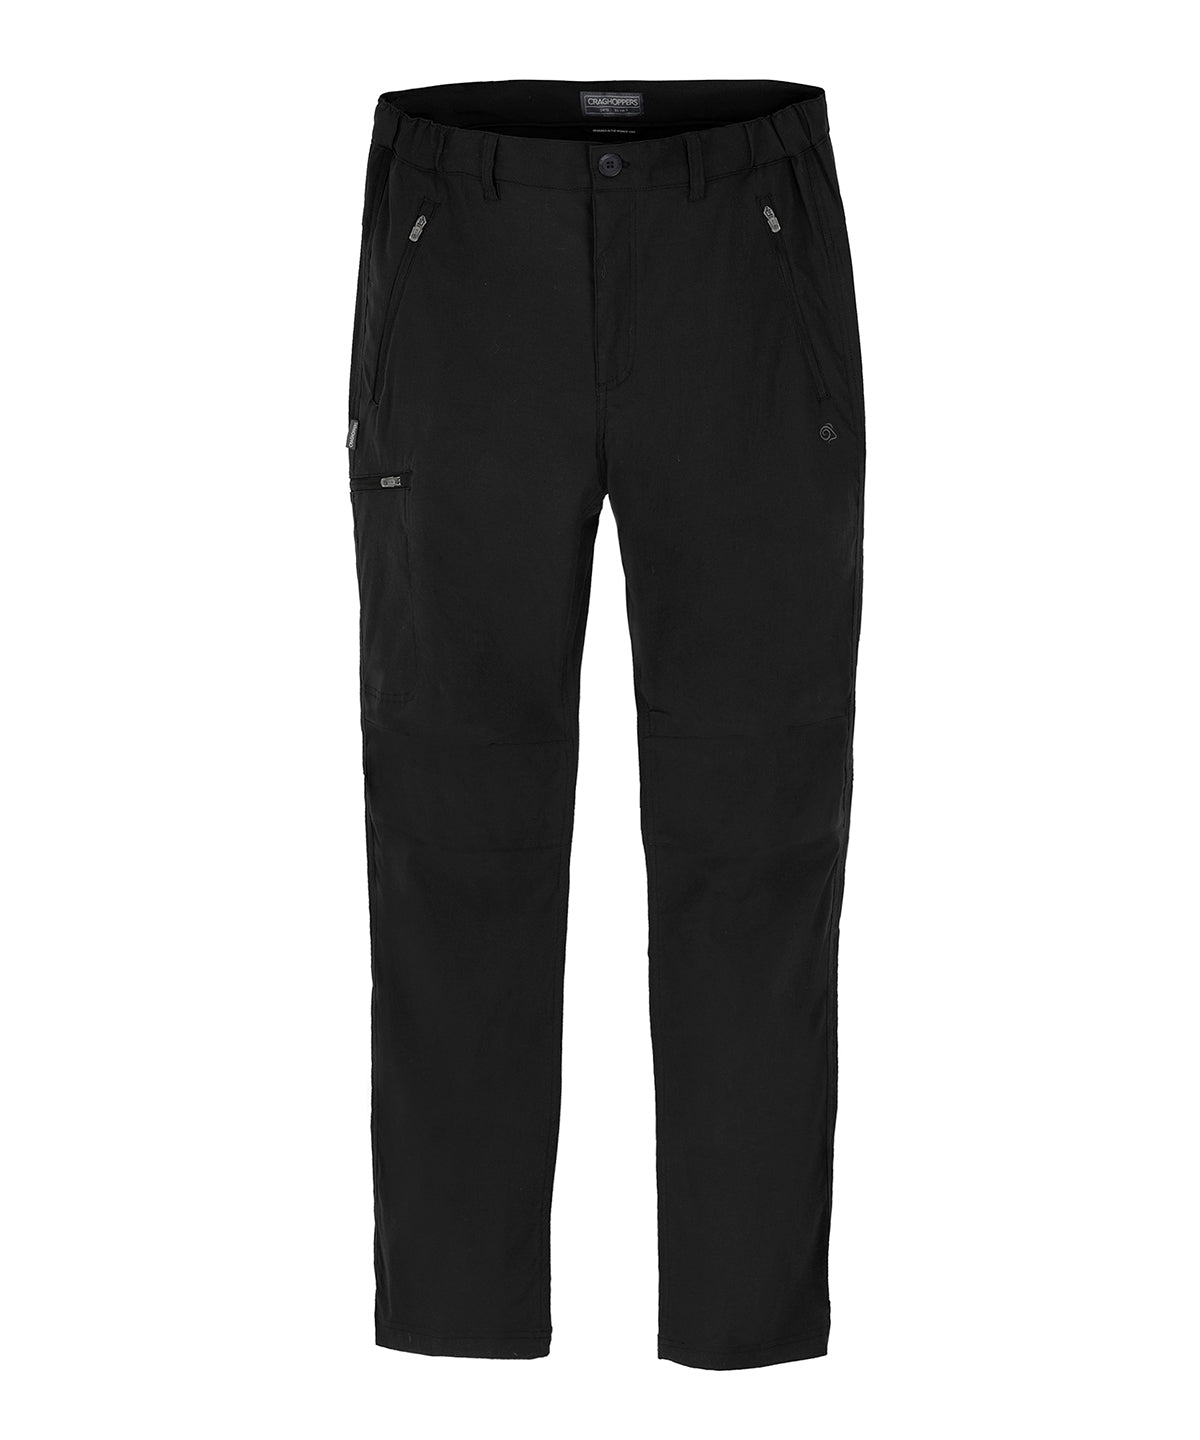 Personalised Trousers - Black Craghoppers Expert Kiwi pro stretch trousers